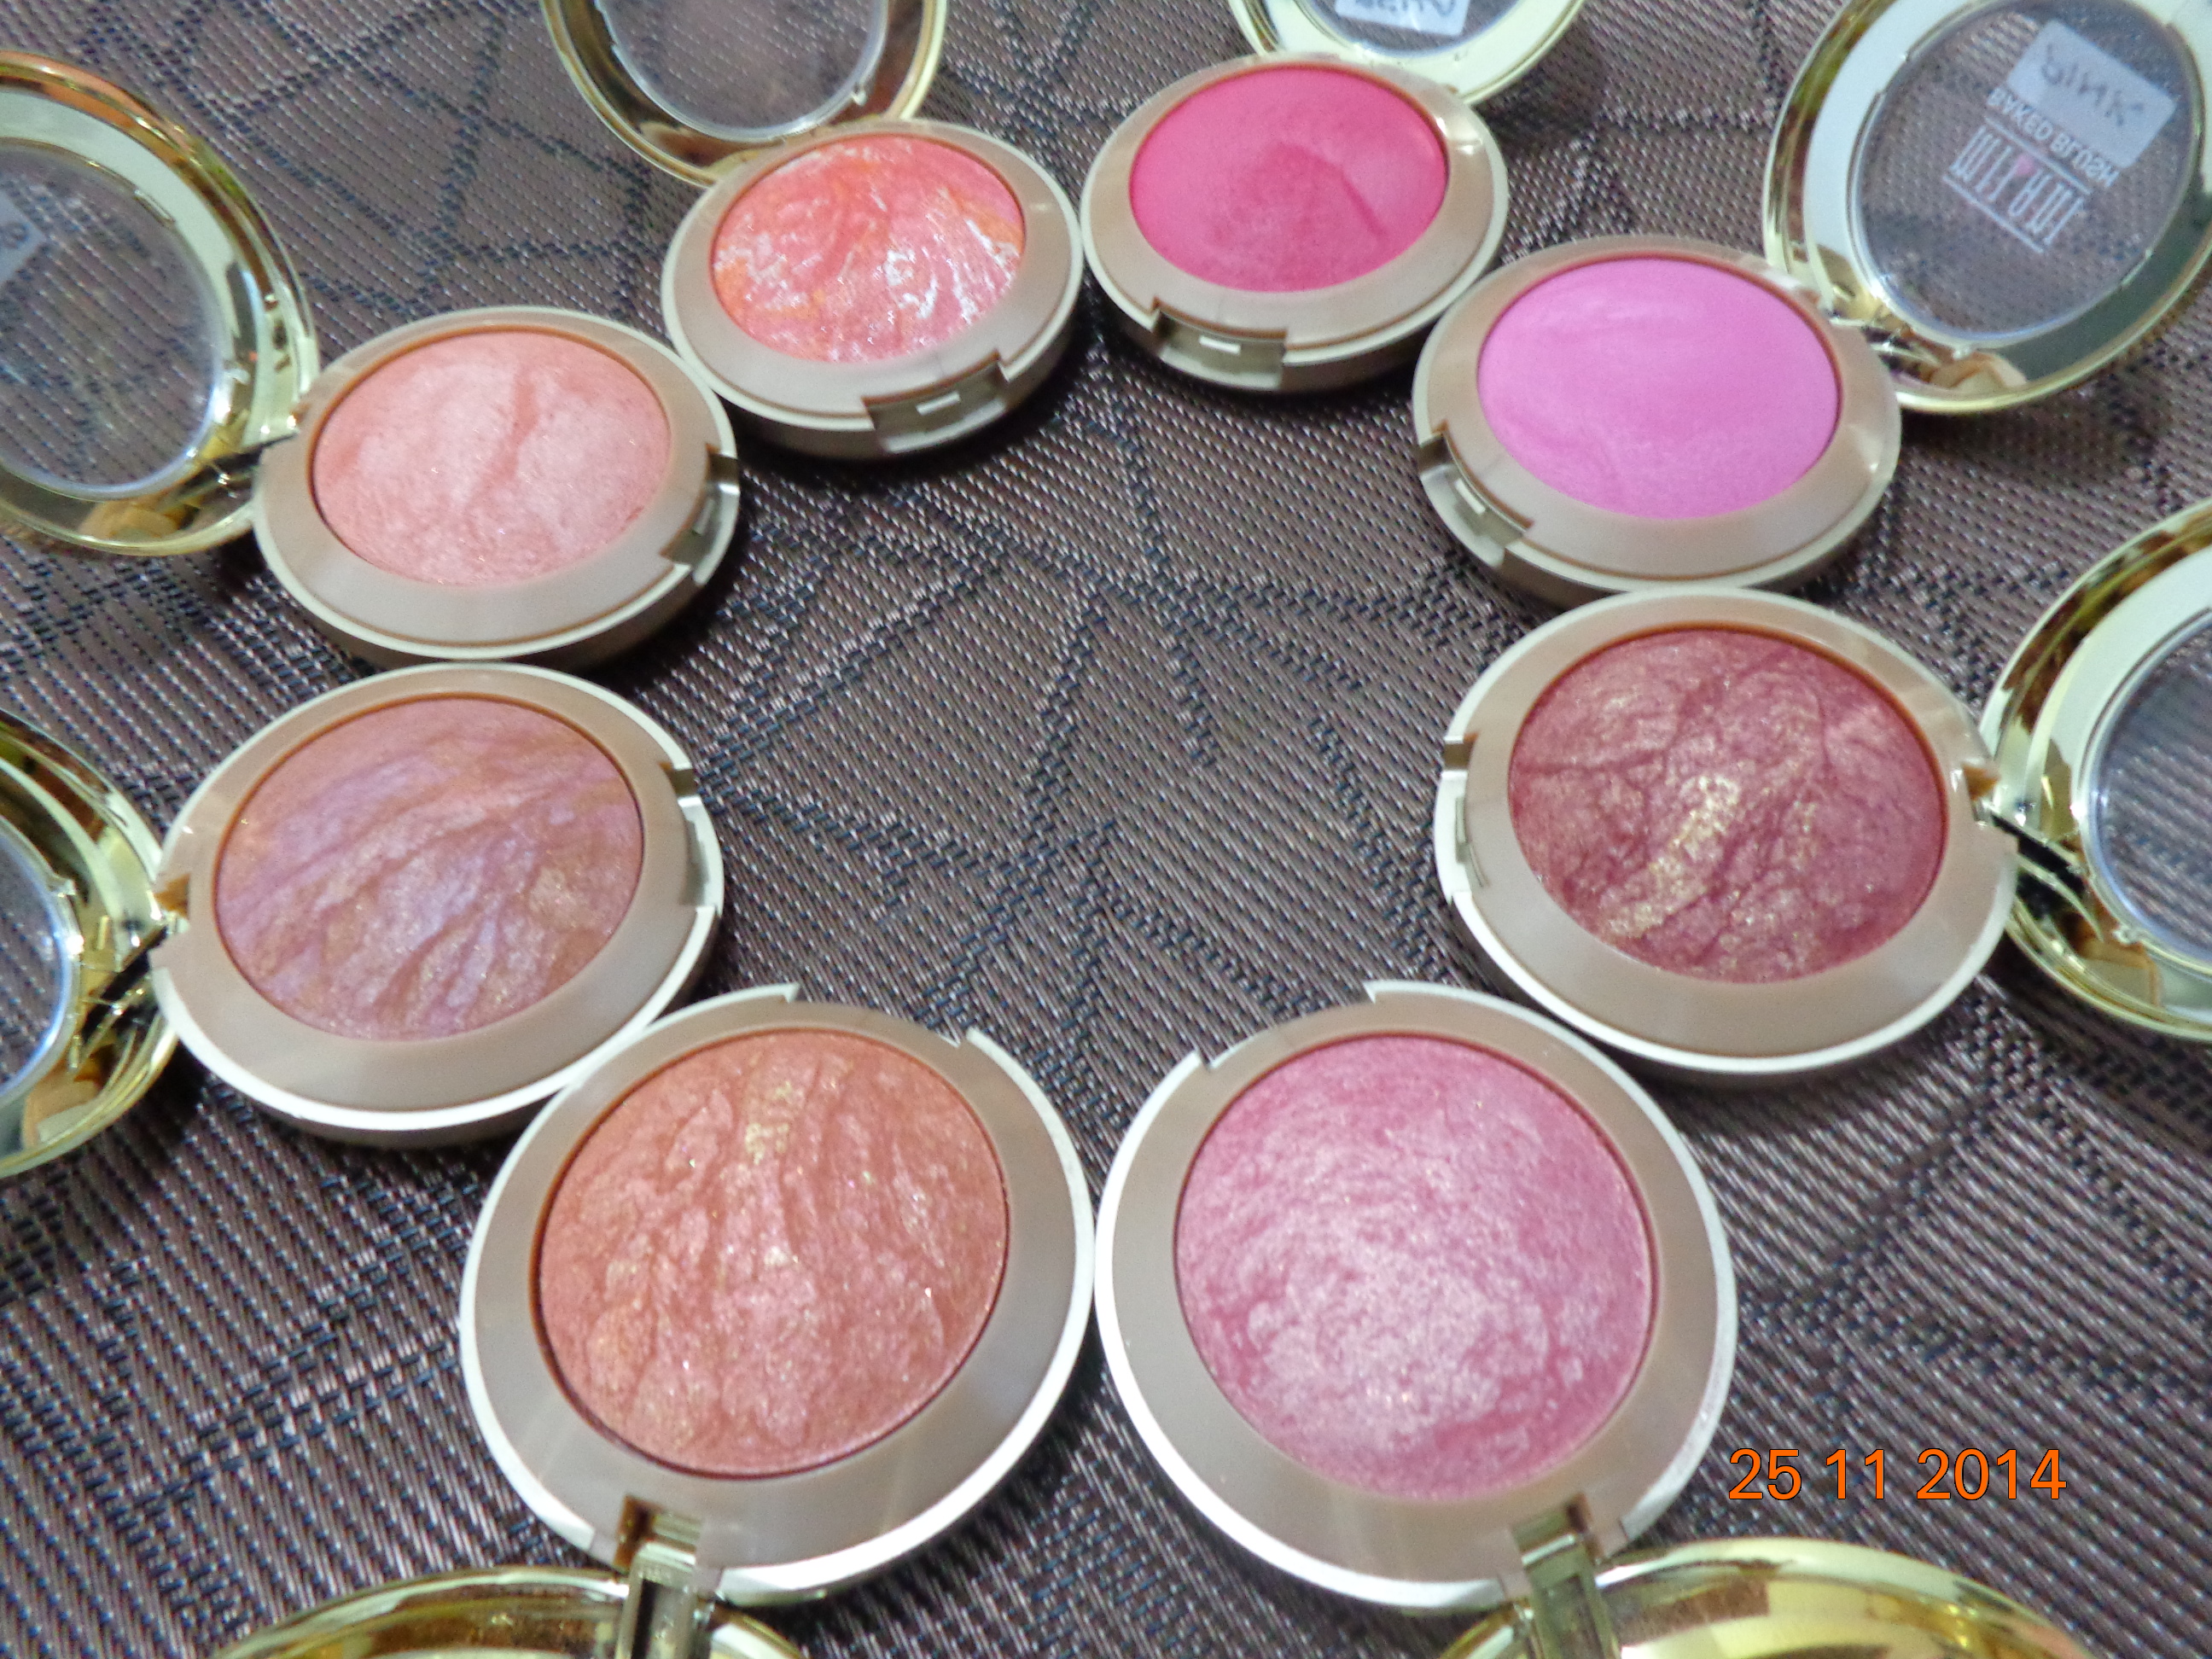 Milani Baked Blushes: Quick Review and Some Dupes for High-End Favorites